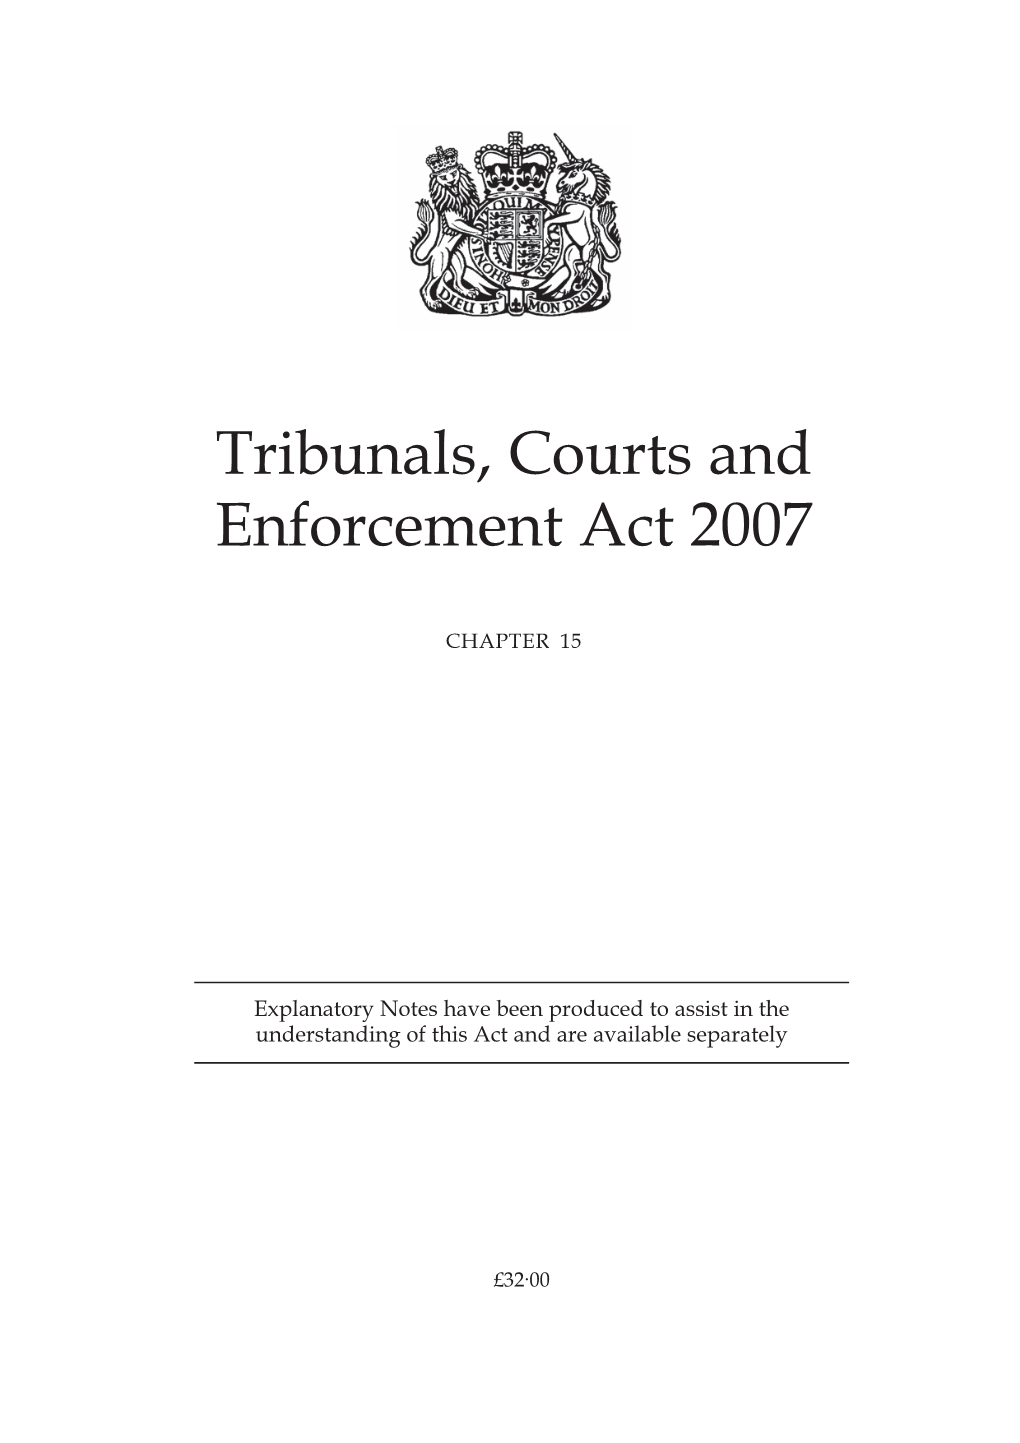 Tribunals, Courts and Enforcement Act 2007